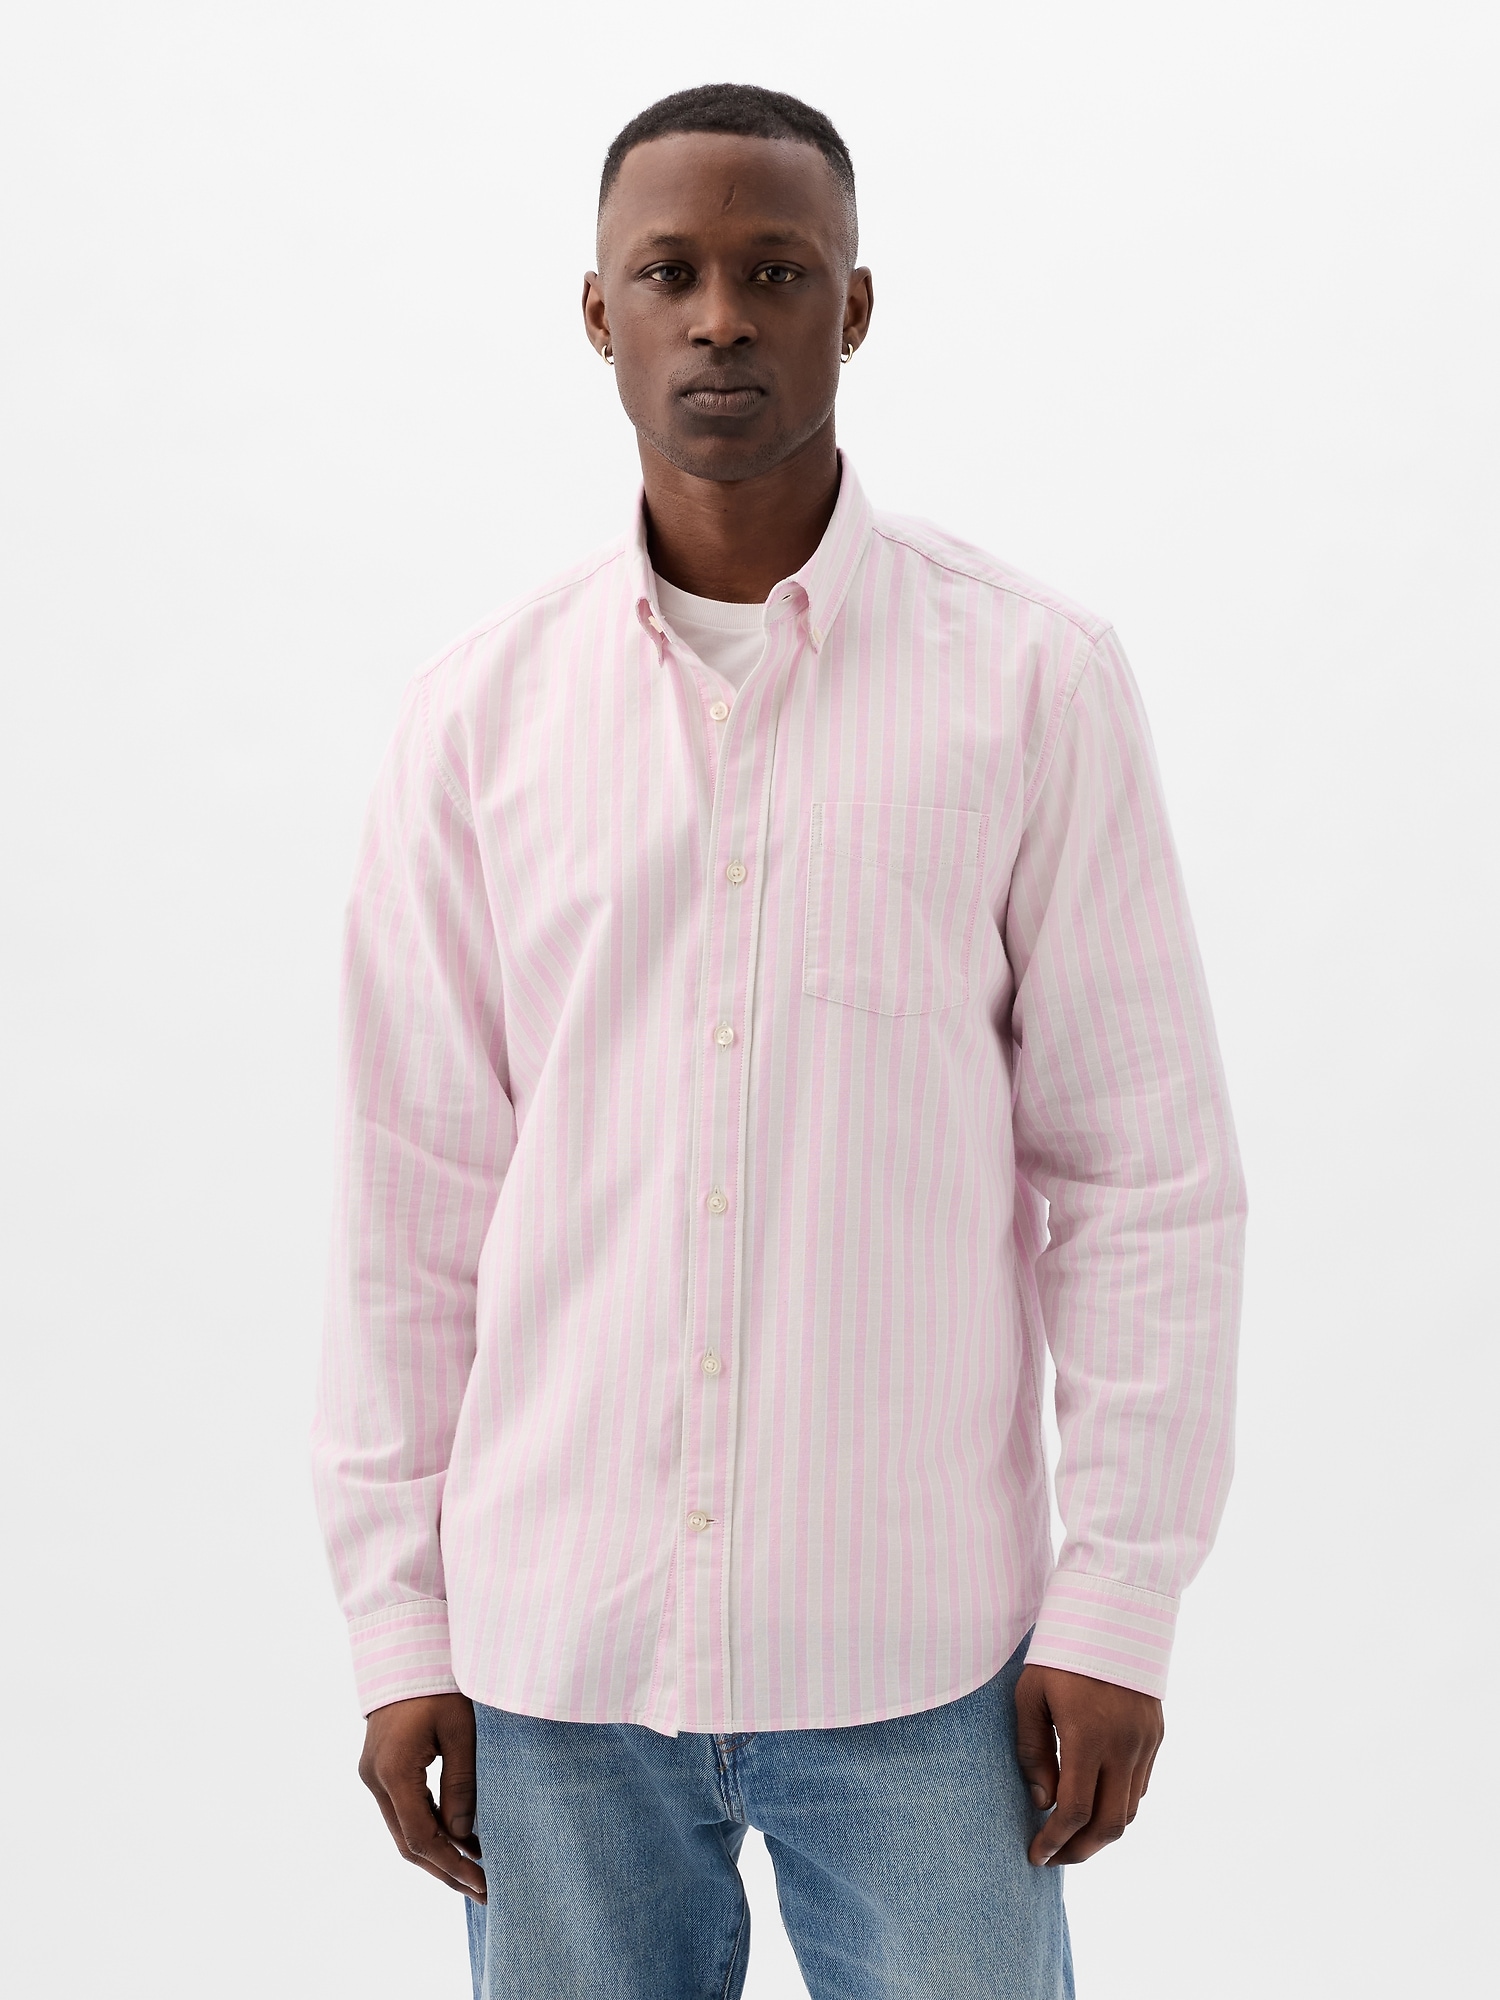 Classic Colorblock Oxford Shirt in Standard Fit with In-Conversion Cotton